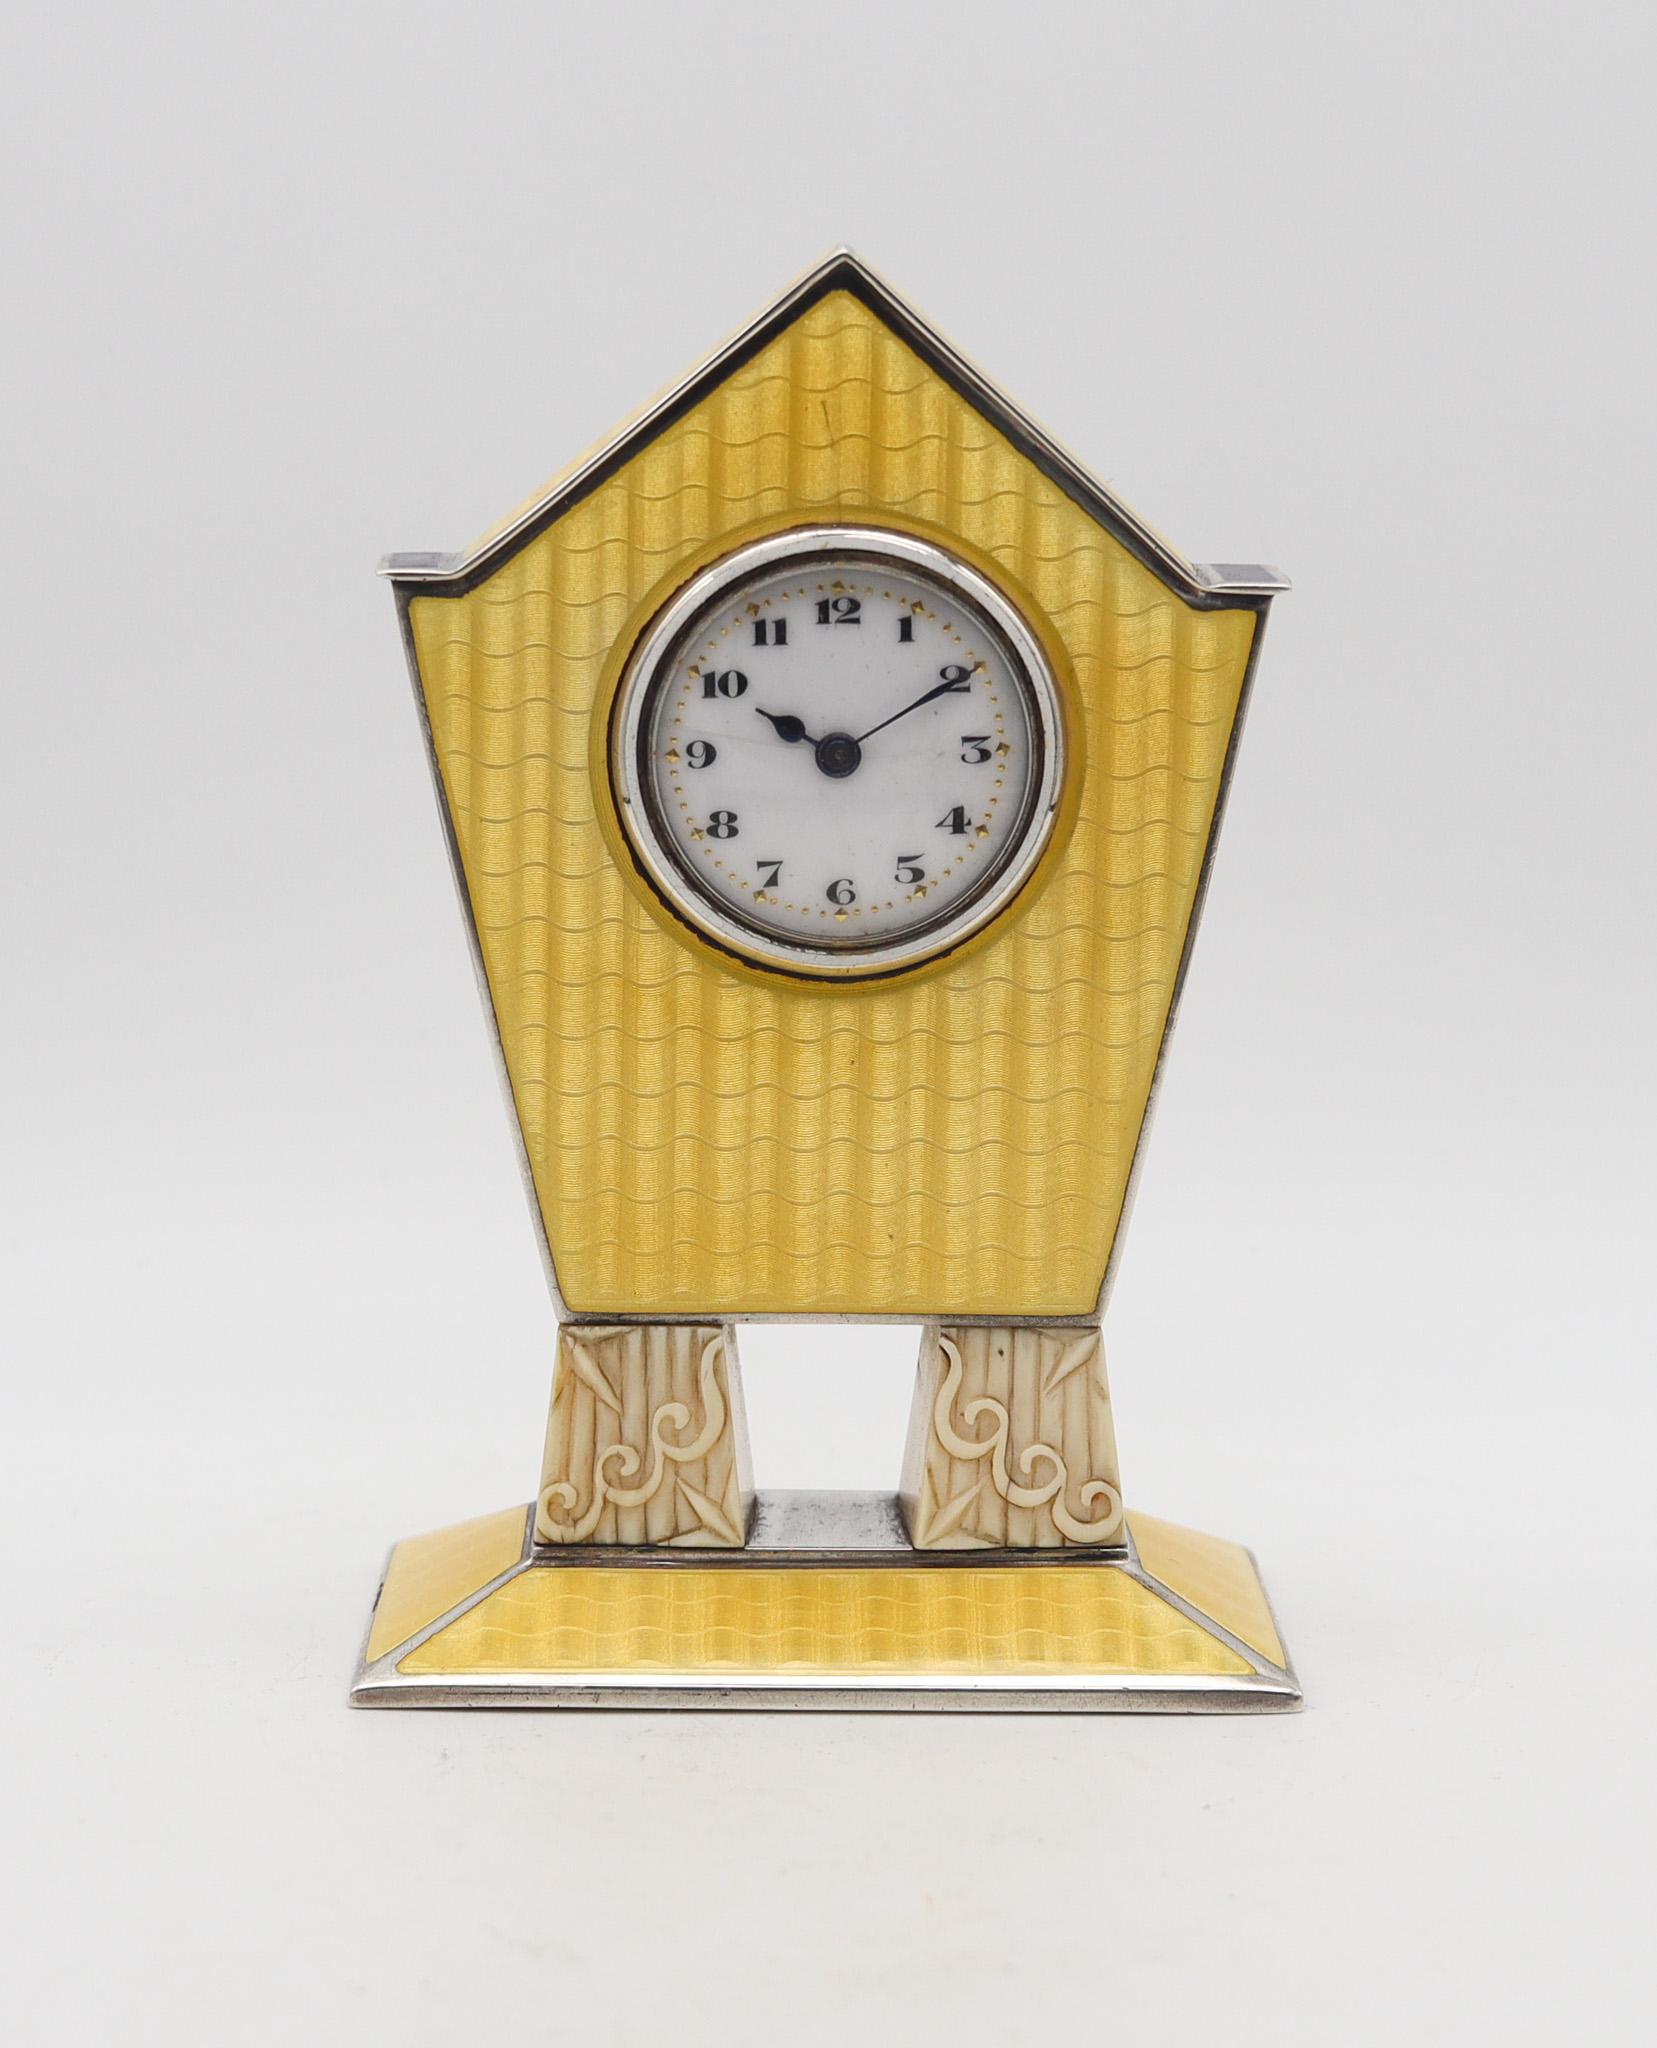 An art deco miniature boudoir desk clock.

Extremely beautiful miniature desk clock, made in Pforzheim Germany during the art deco period, back in the 1920. The craftsmanship of this boudoir clock is exceptional, crafted with gorgeous geometric deco